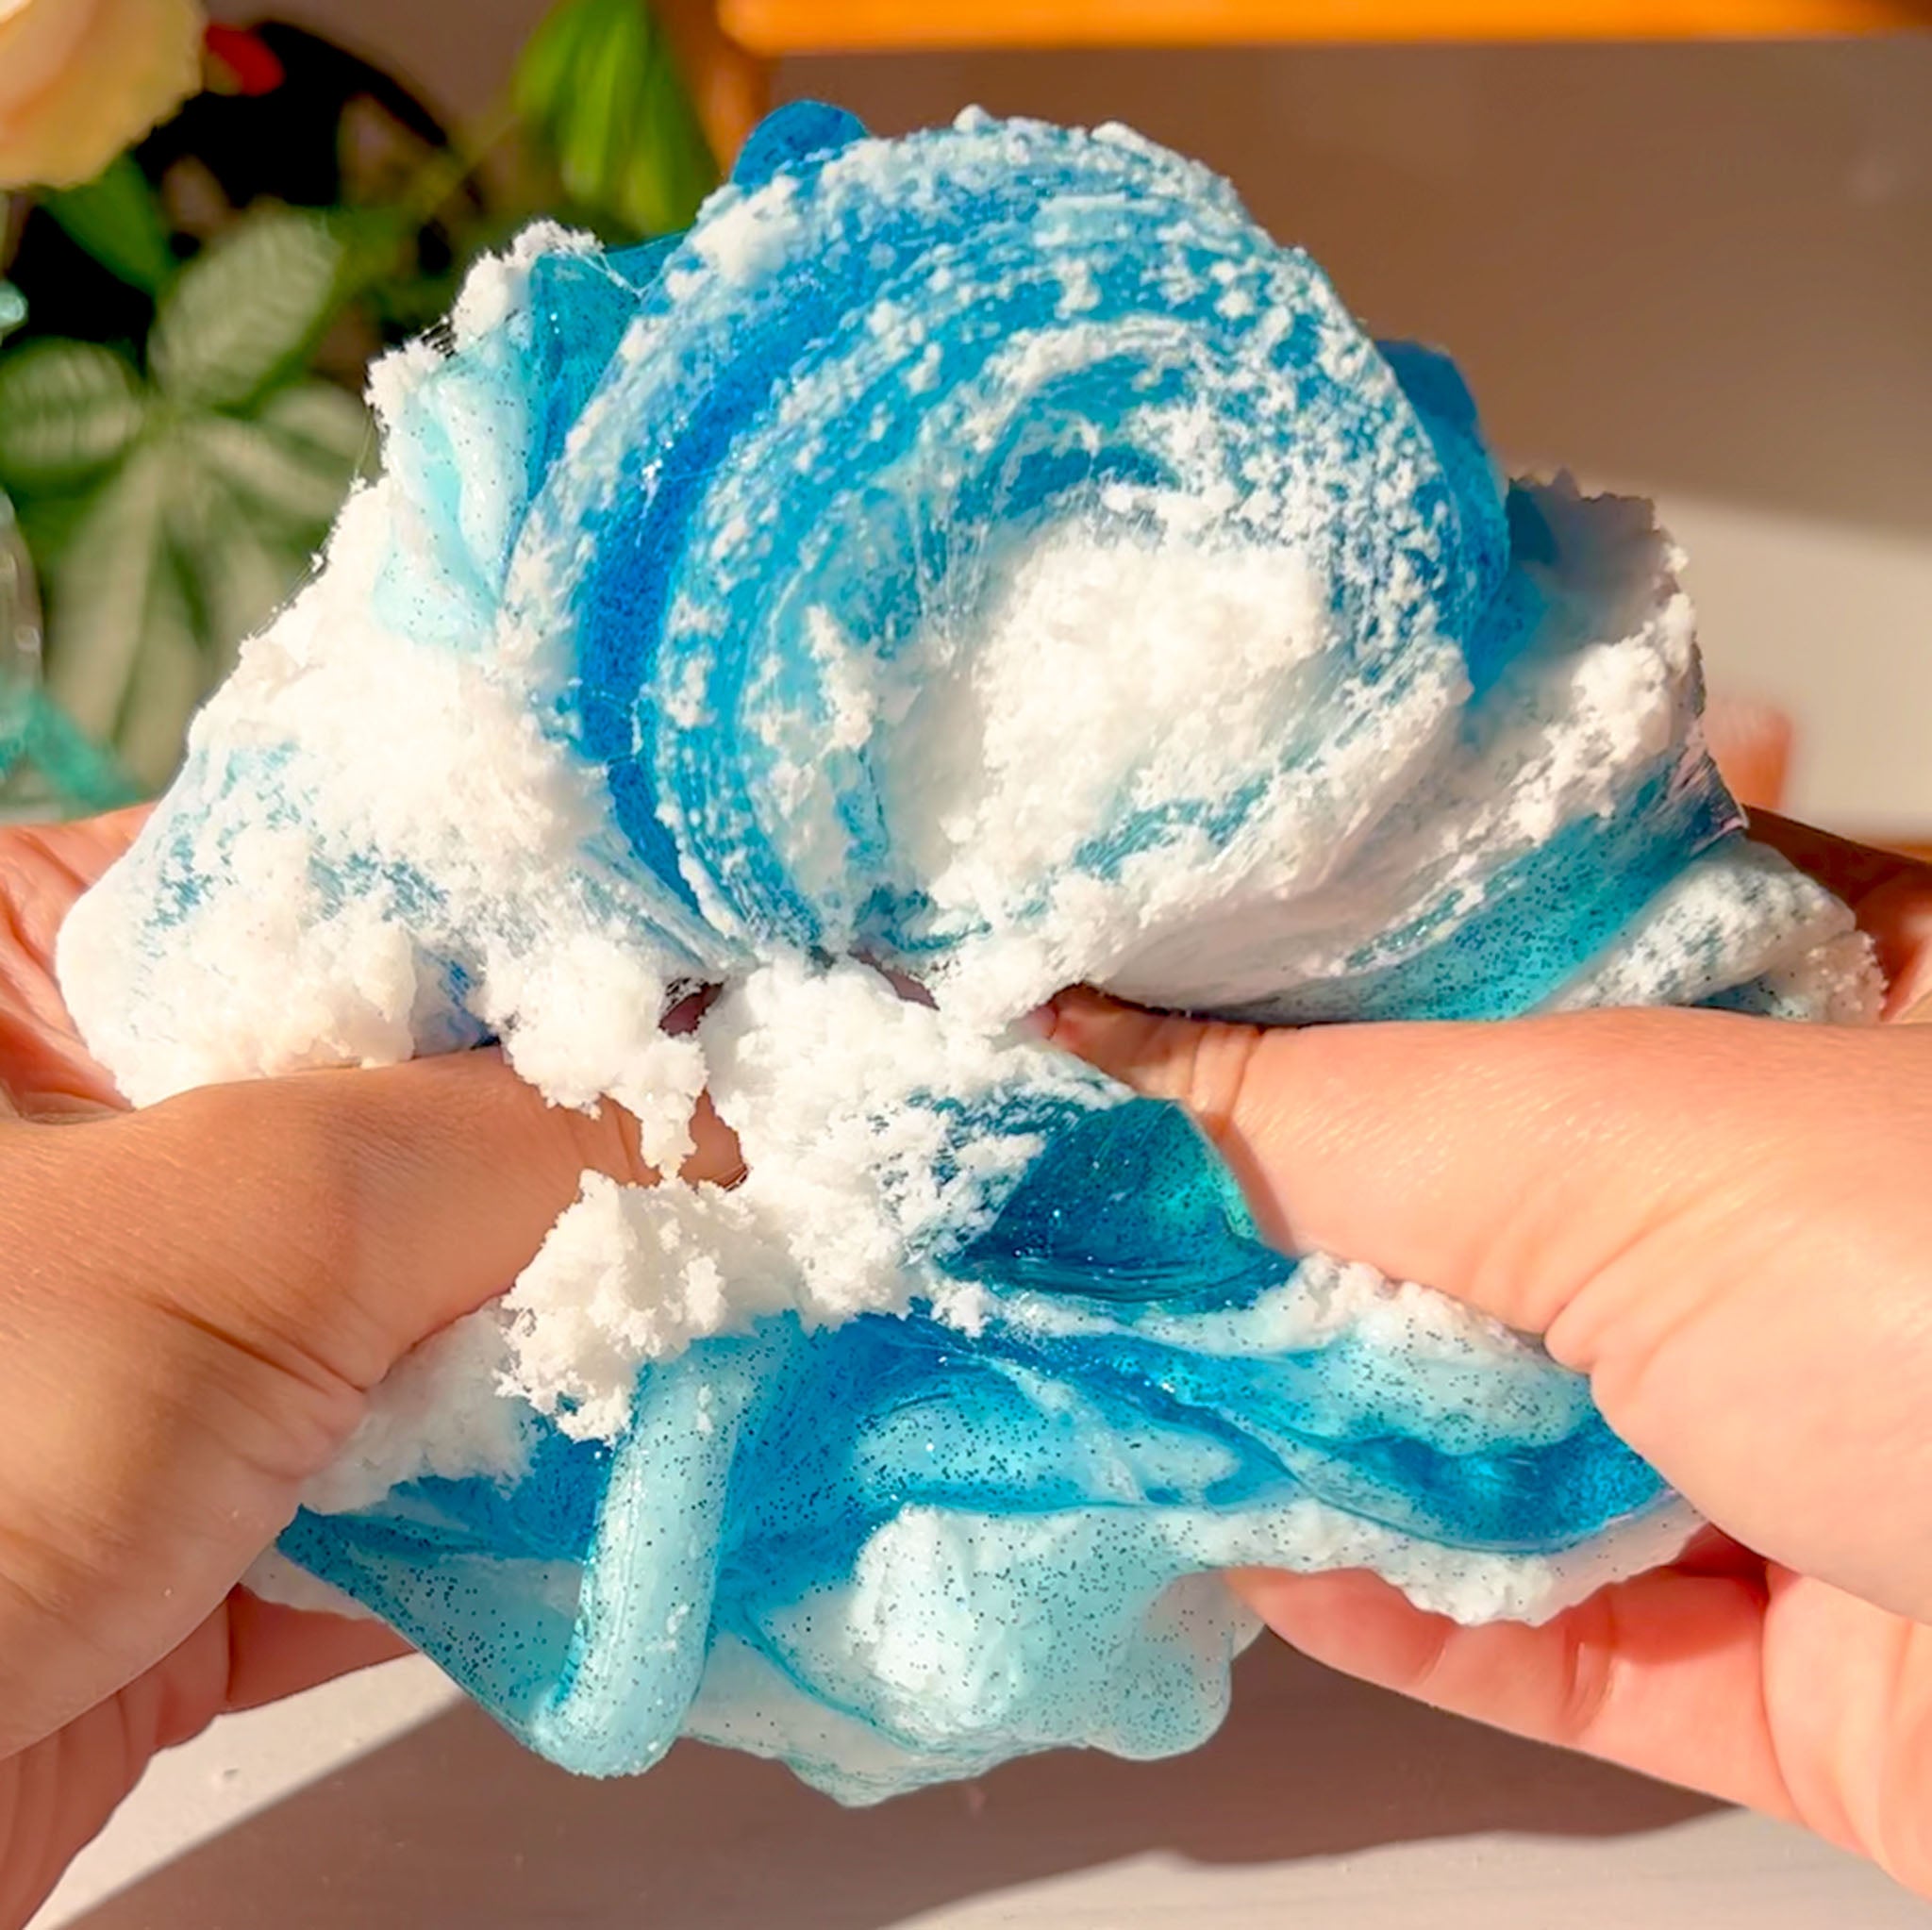 Arctic Cloud Dreamer Winter Clear Cloud Laundry Scented Slime Fantasies Shop Swirl Squeeze